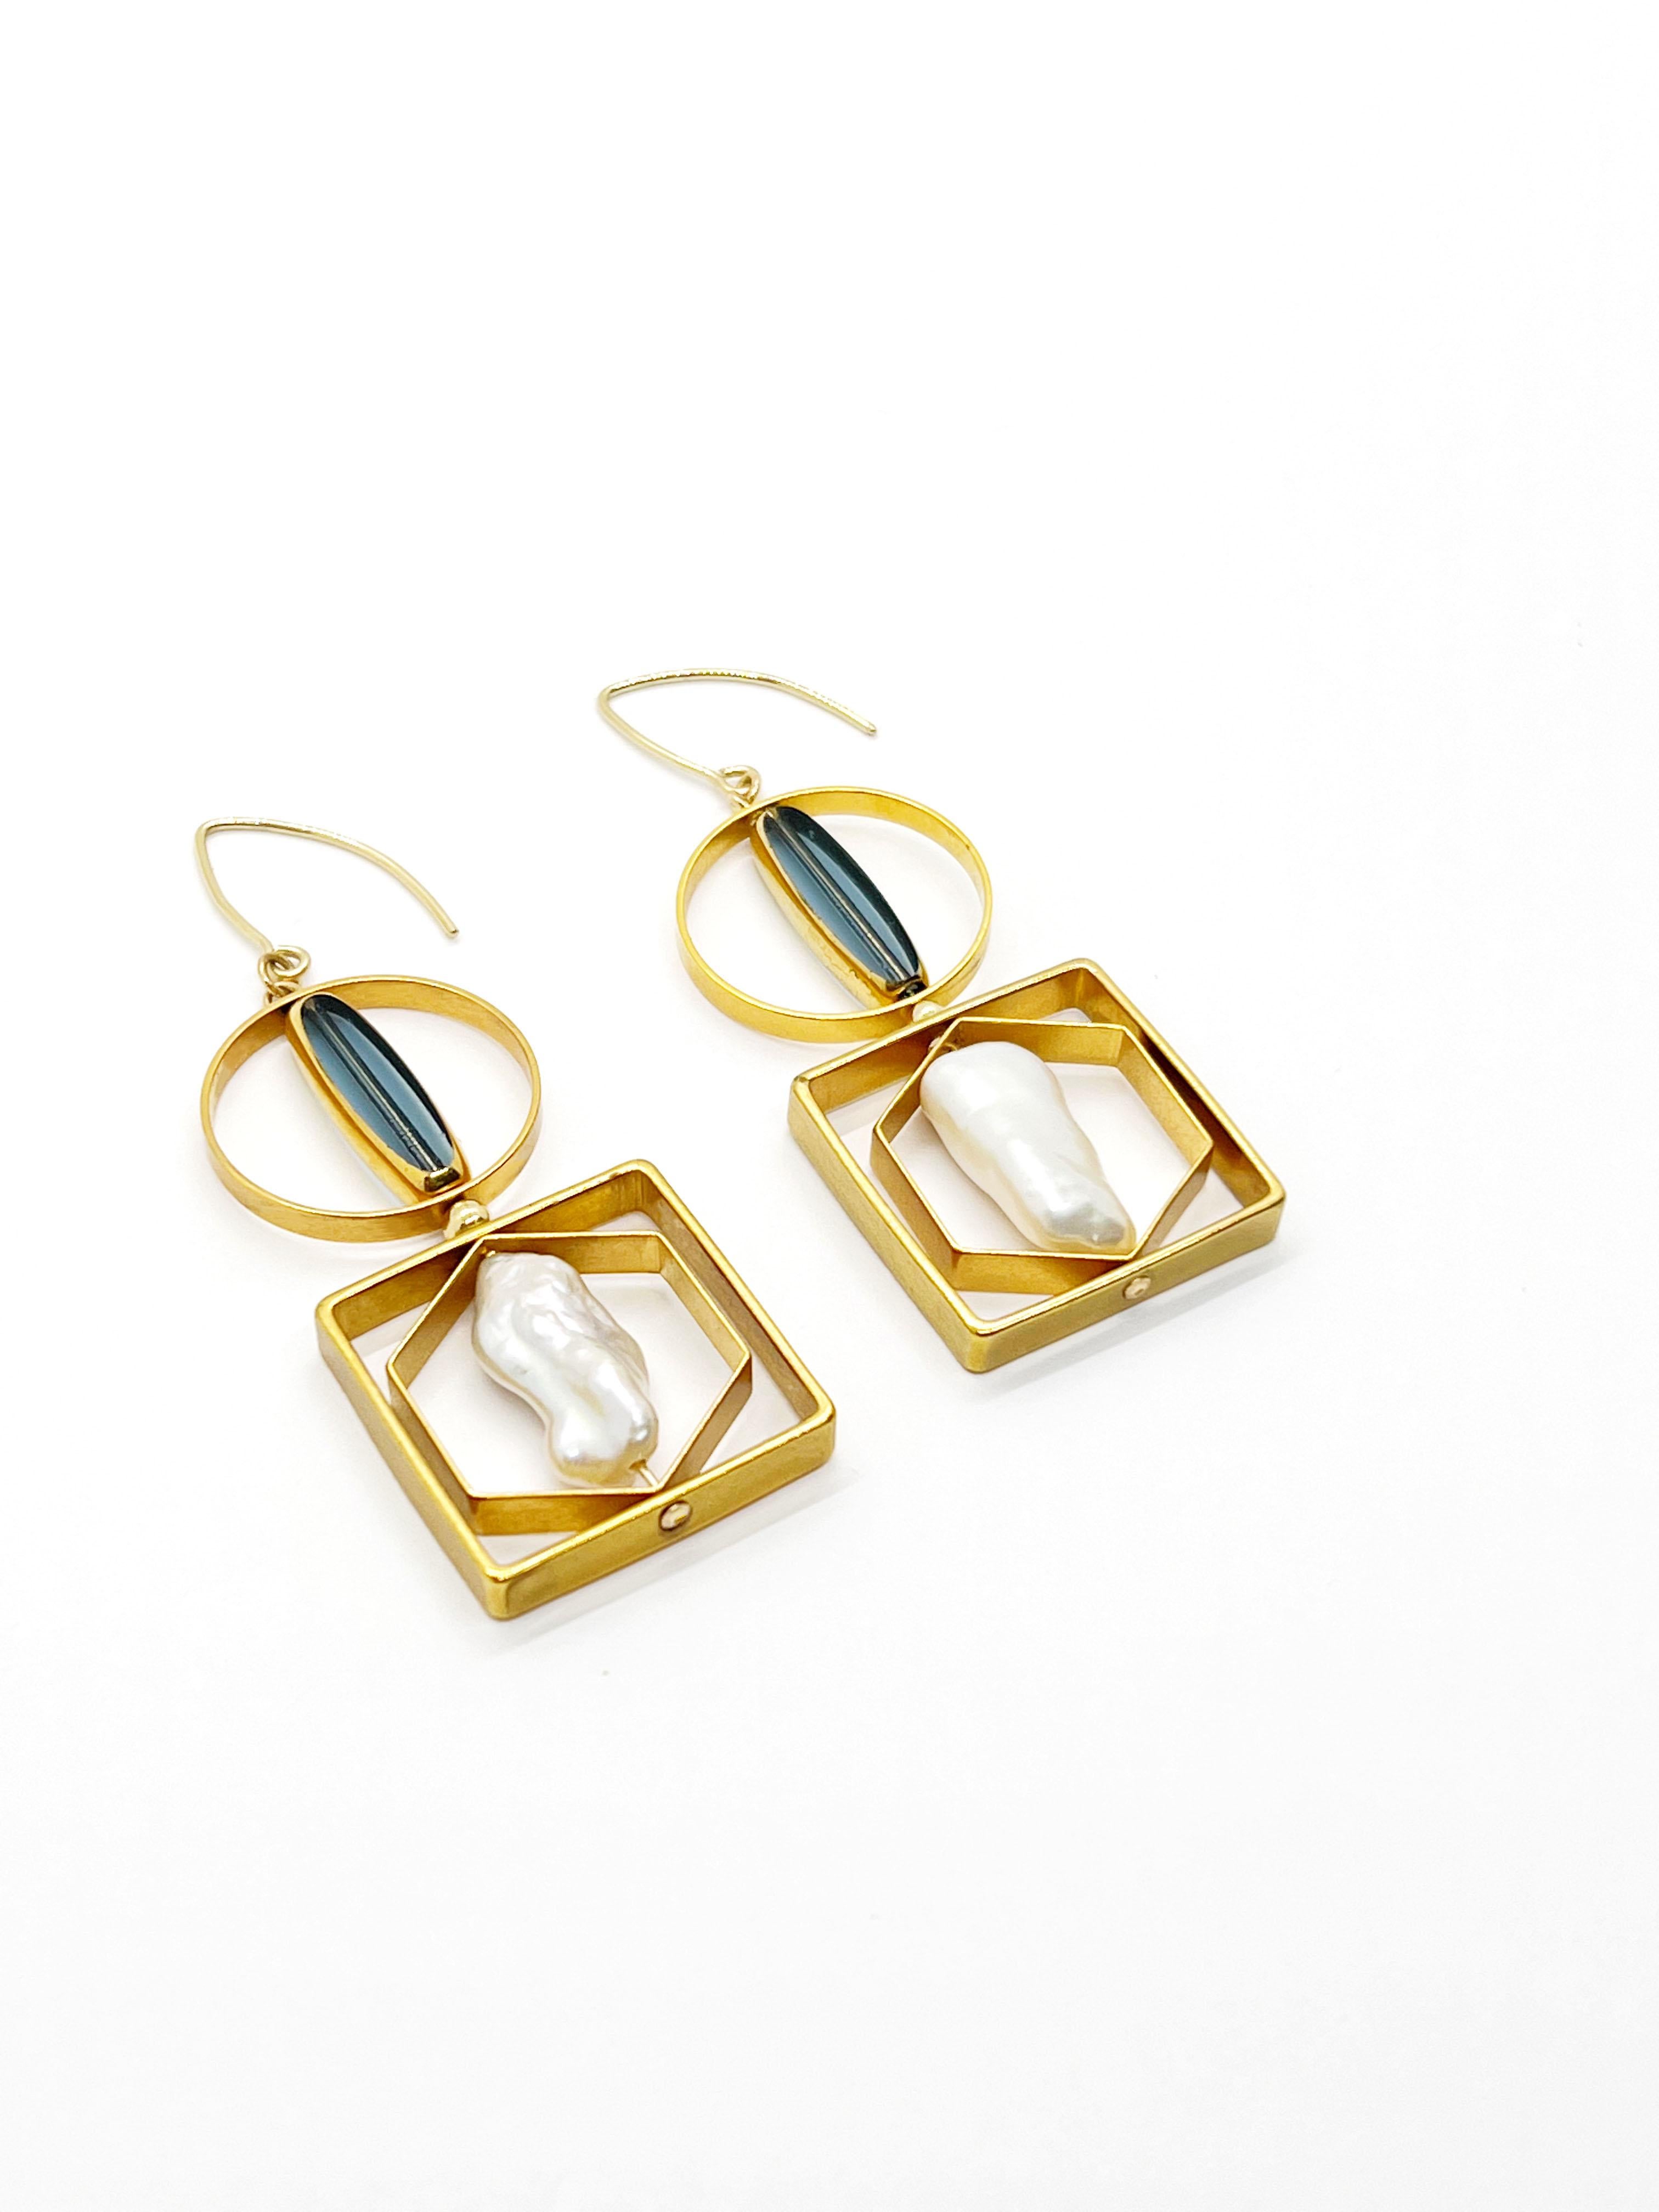 These earrings are light weight. They may turn and reposition with movement. It is composed of German Vintage Glass Beads that are edged with 24K gold. It is incorporated with Biwa freshwater pearls set in a geometric frame.

The vintage glass beads